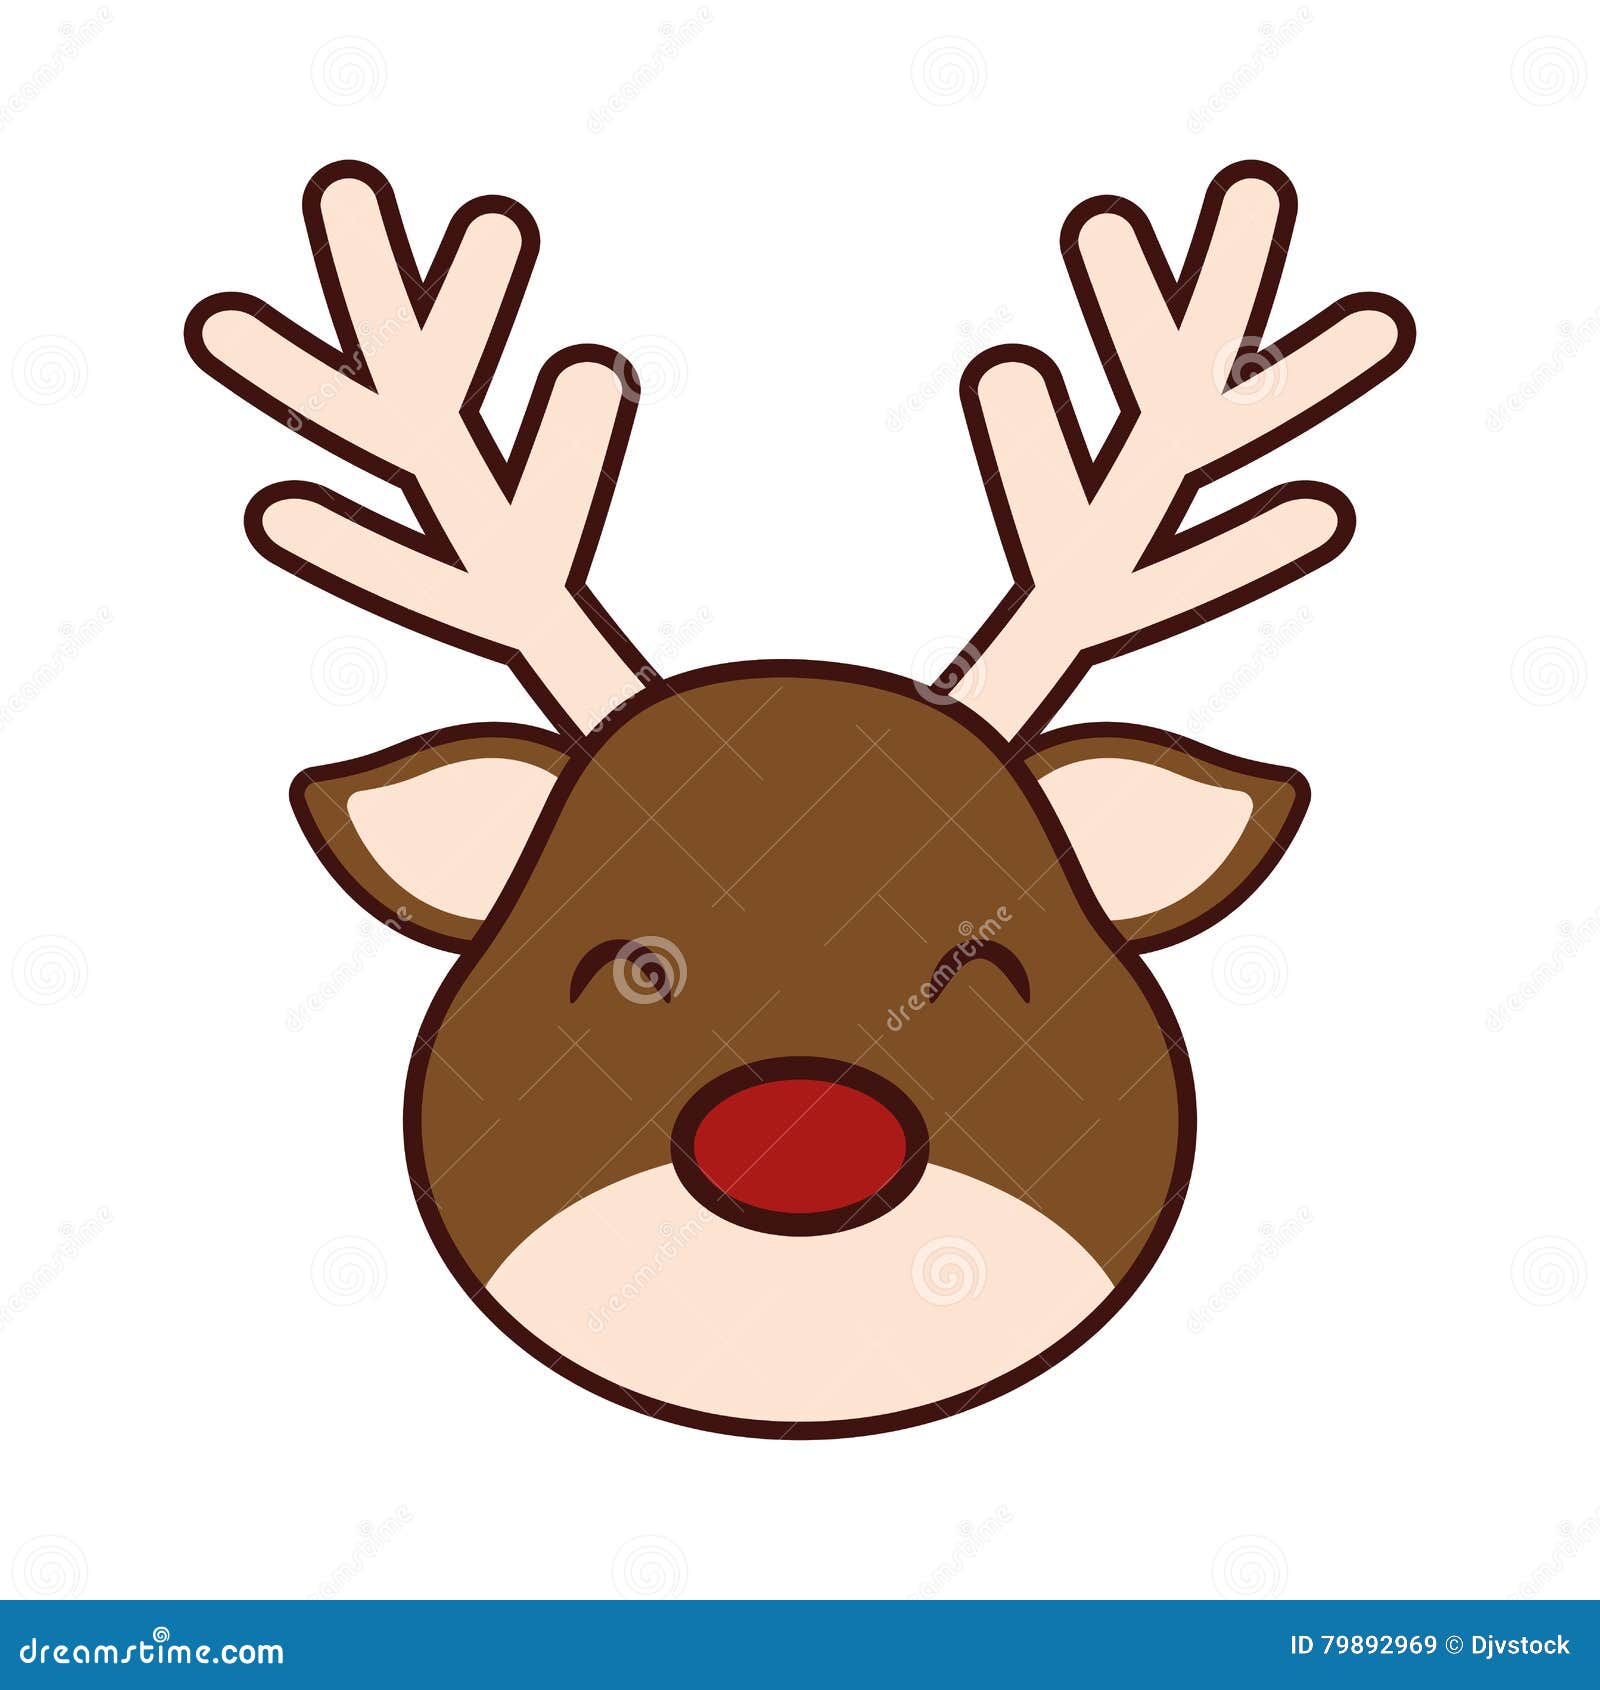 Cute Reindeer Character Icon Stock Vector - Illustration of december ...